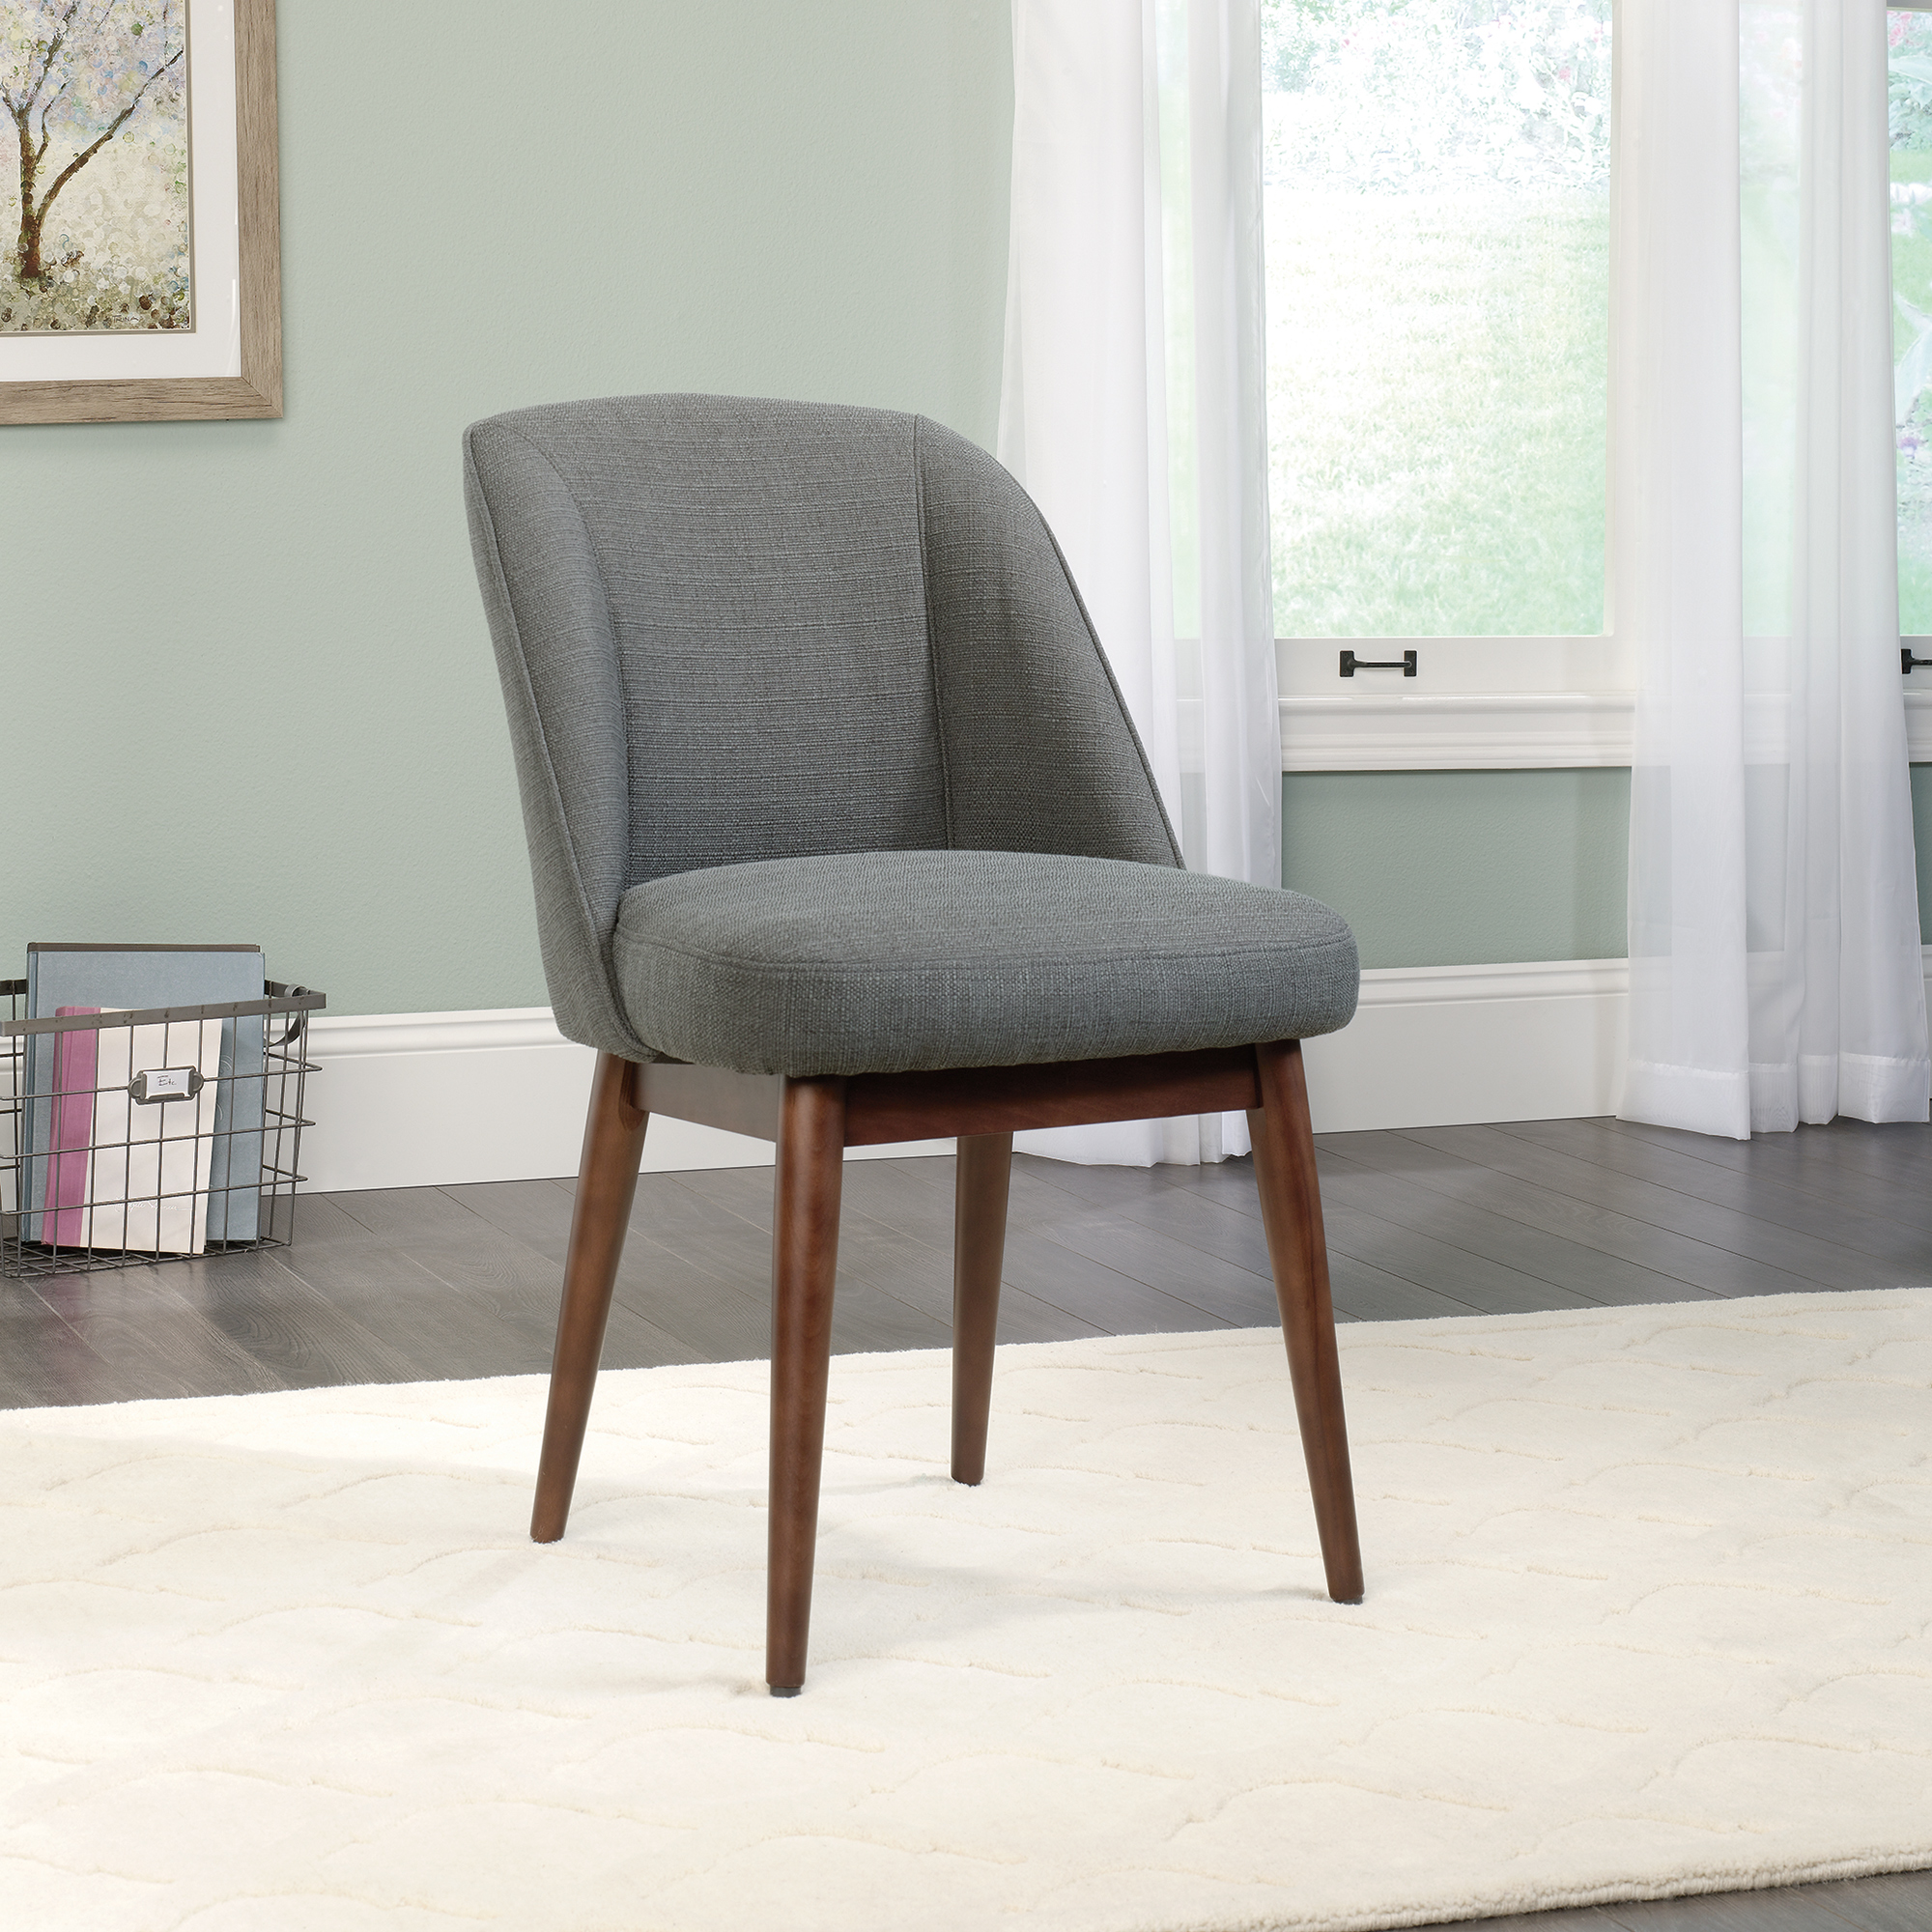 sauder select luna accent chair chairs with table oval dining cover decorative storage cabinets furniture pottery barn glass top coffee bungee target uma console bunnings bench